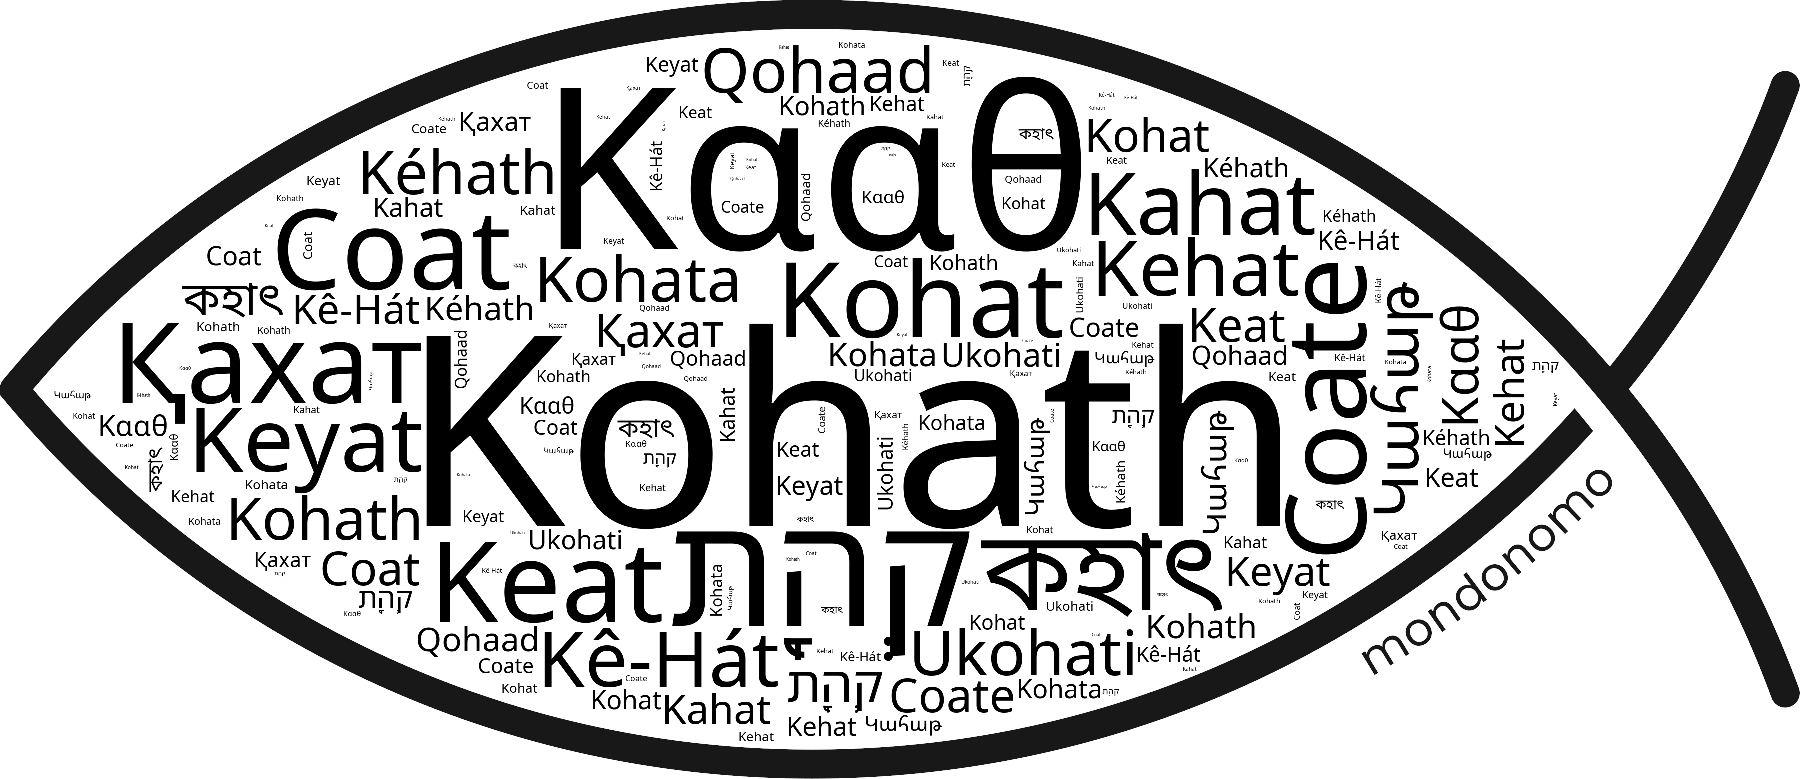 Name Kohath in the world's Bibles